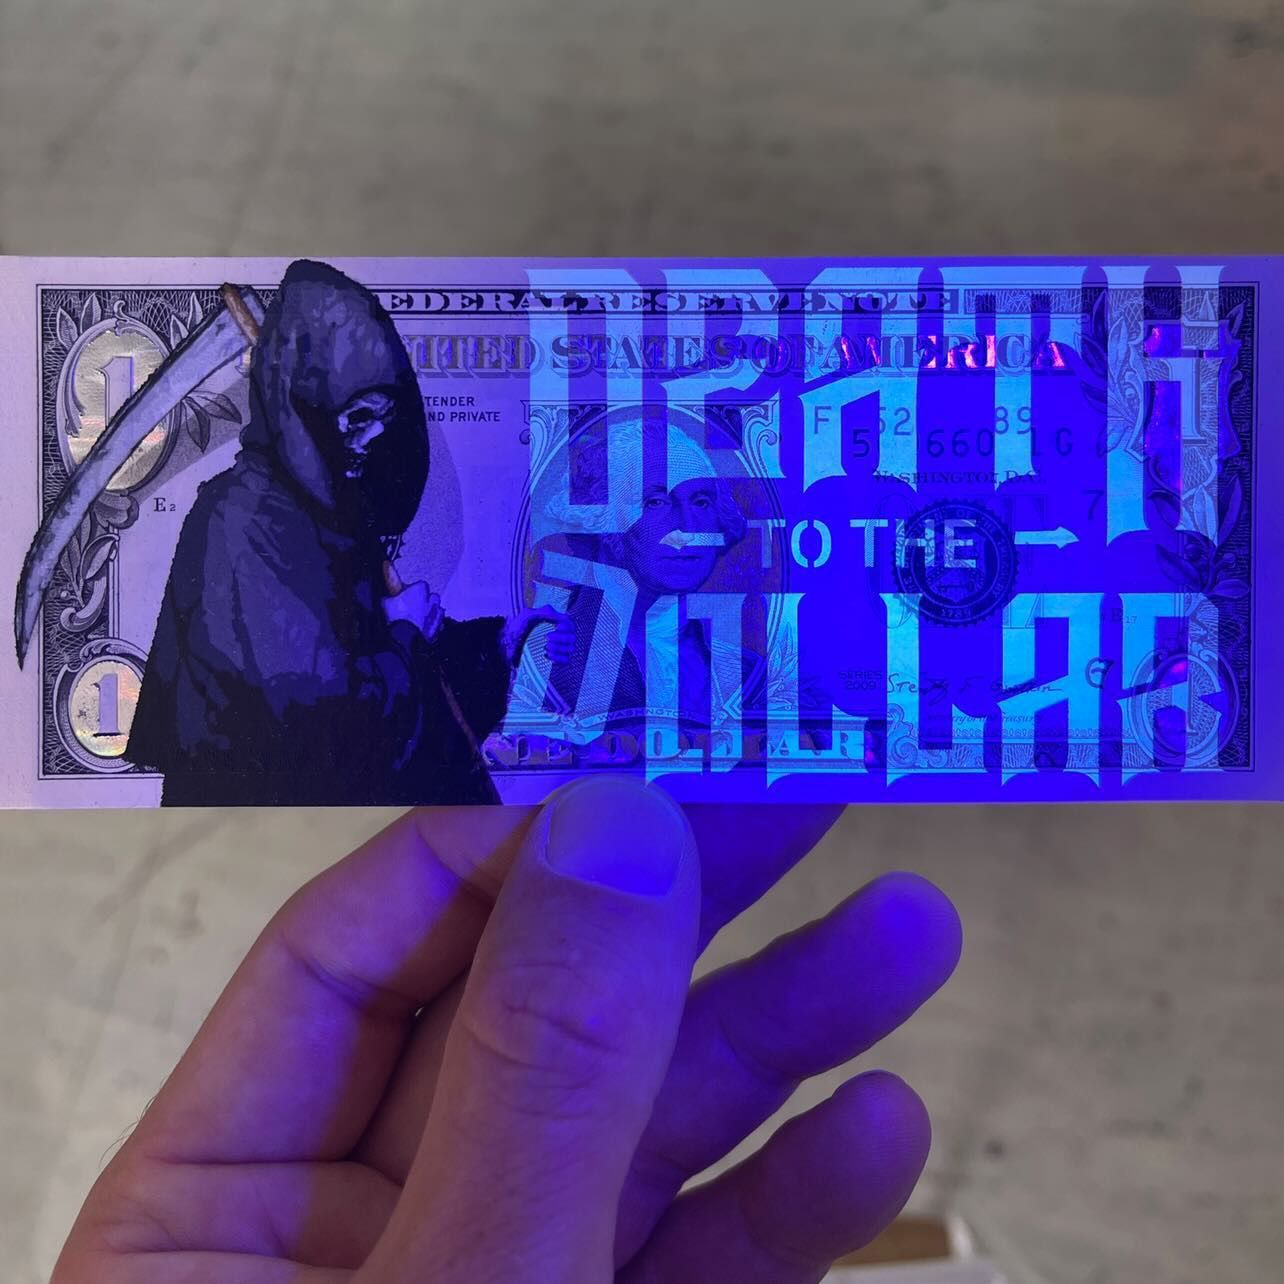 Ghost Writer -  Death To The Dollar by Penny (only 1 available)